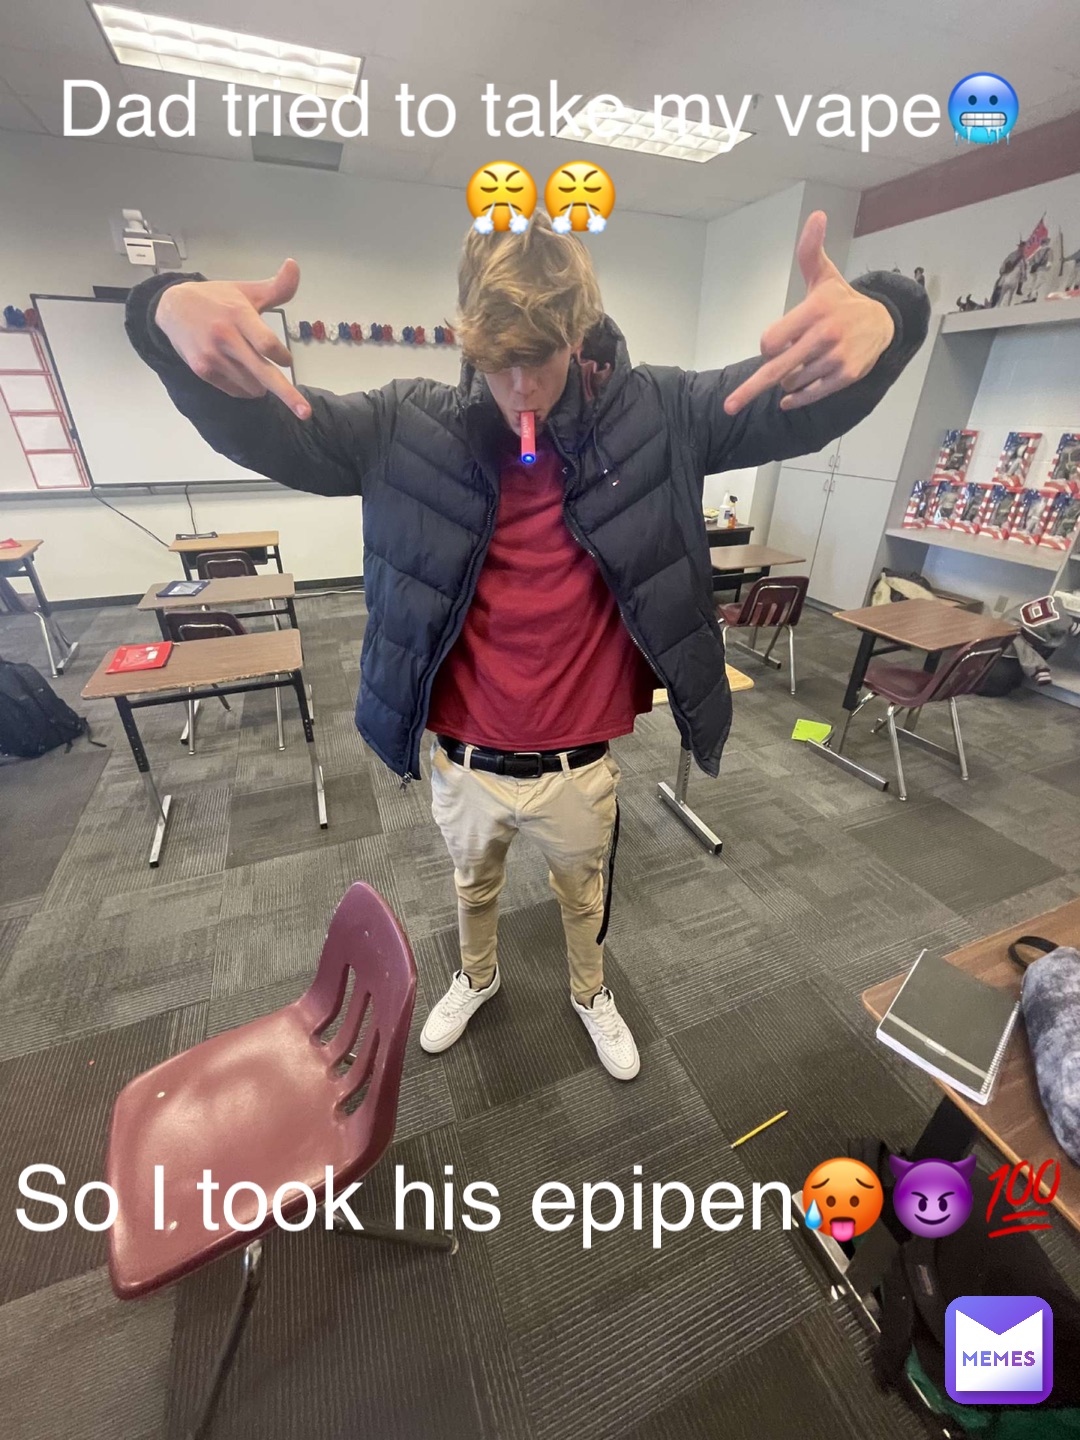 Dad tried to take my vape🥶😤😤 So I took his epipen🥵😈💯